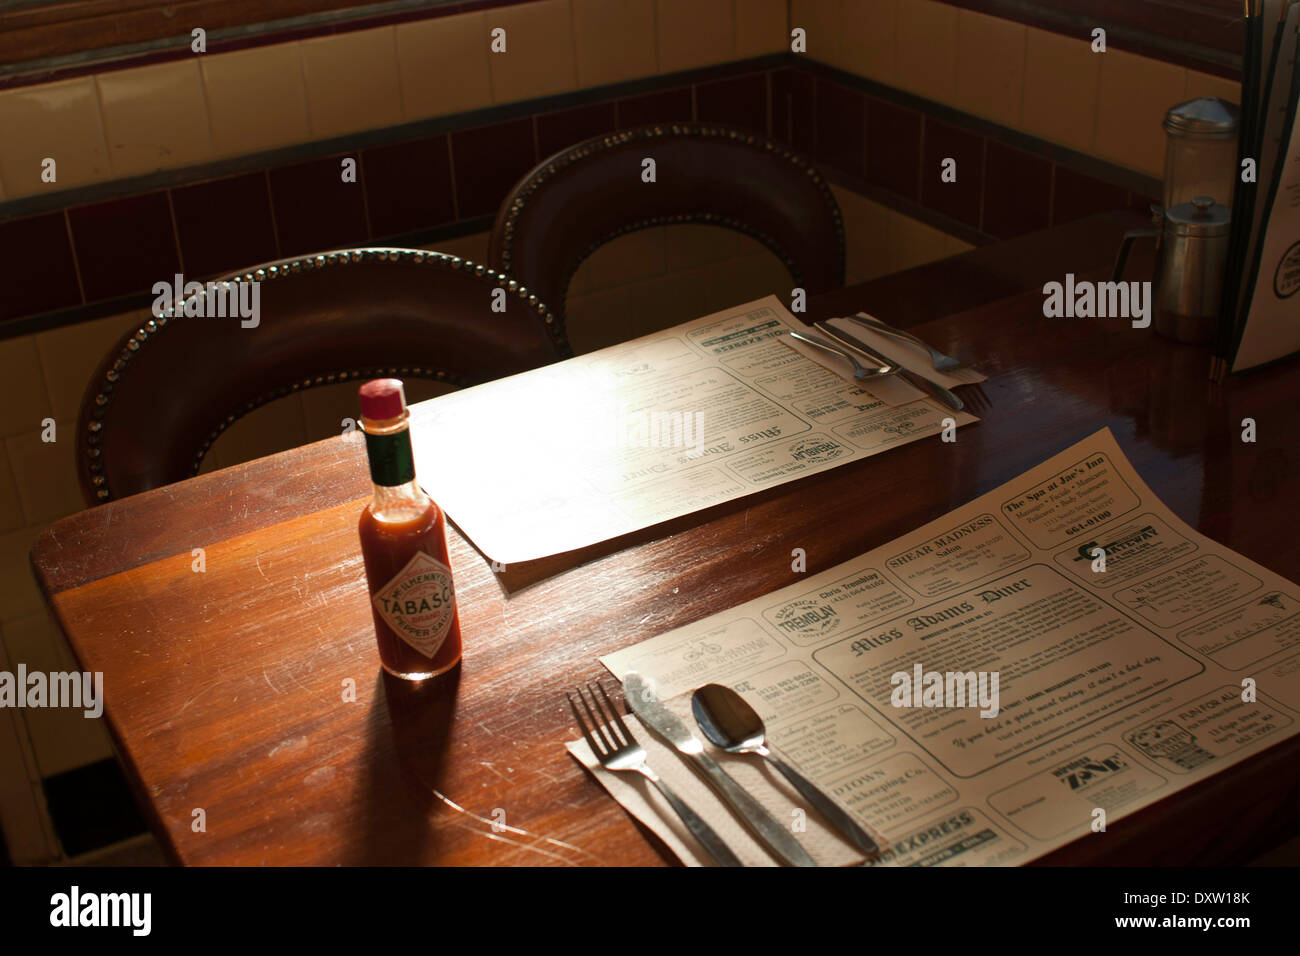 Diner condiments sit on the table in a small town diner.  Place mats advertise local businesses. Stock Photo